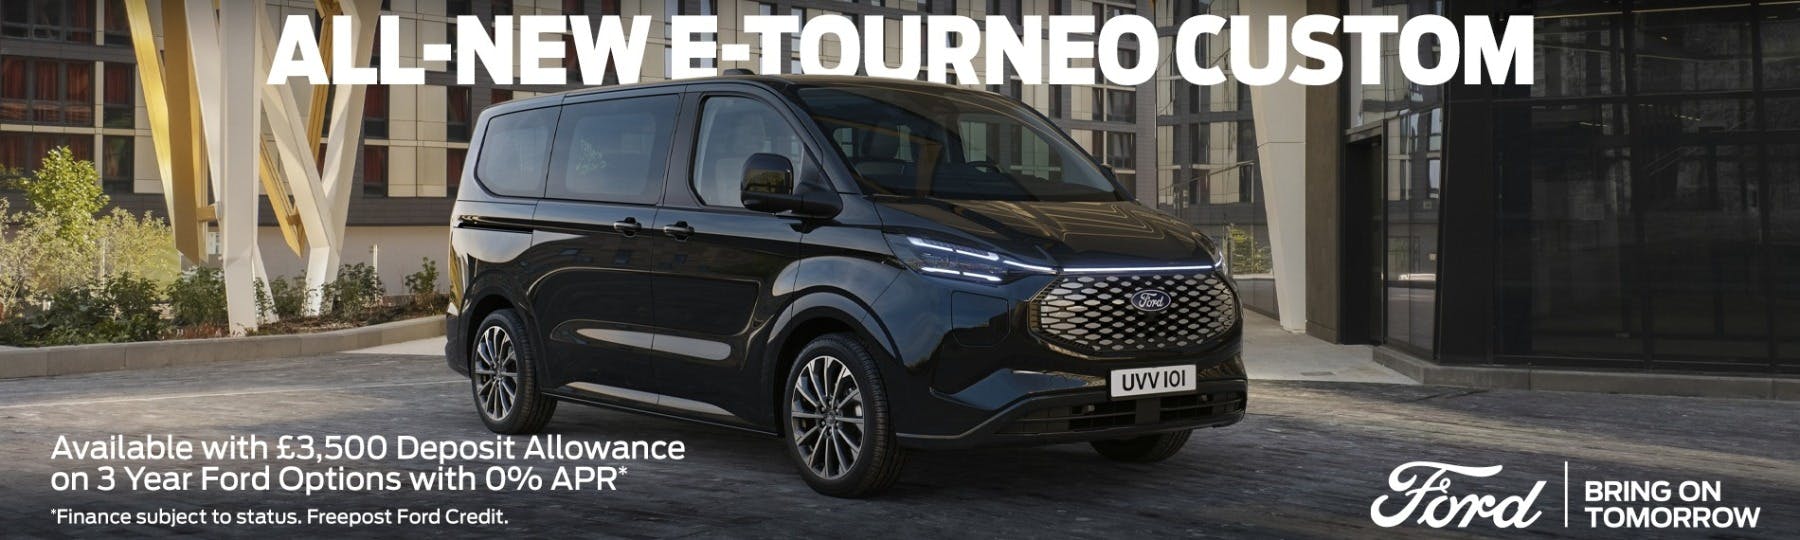 All-New Ford Tourneo Custom New Car Offer